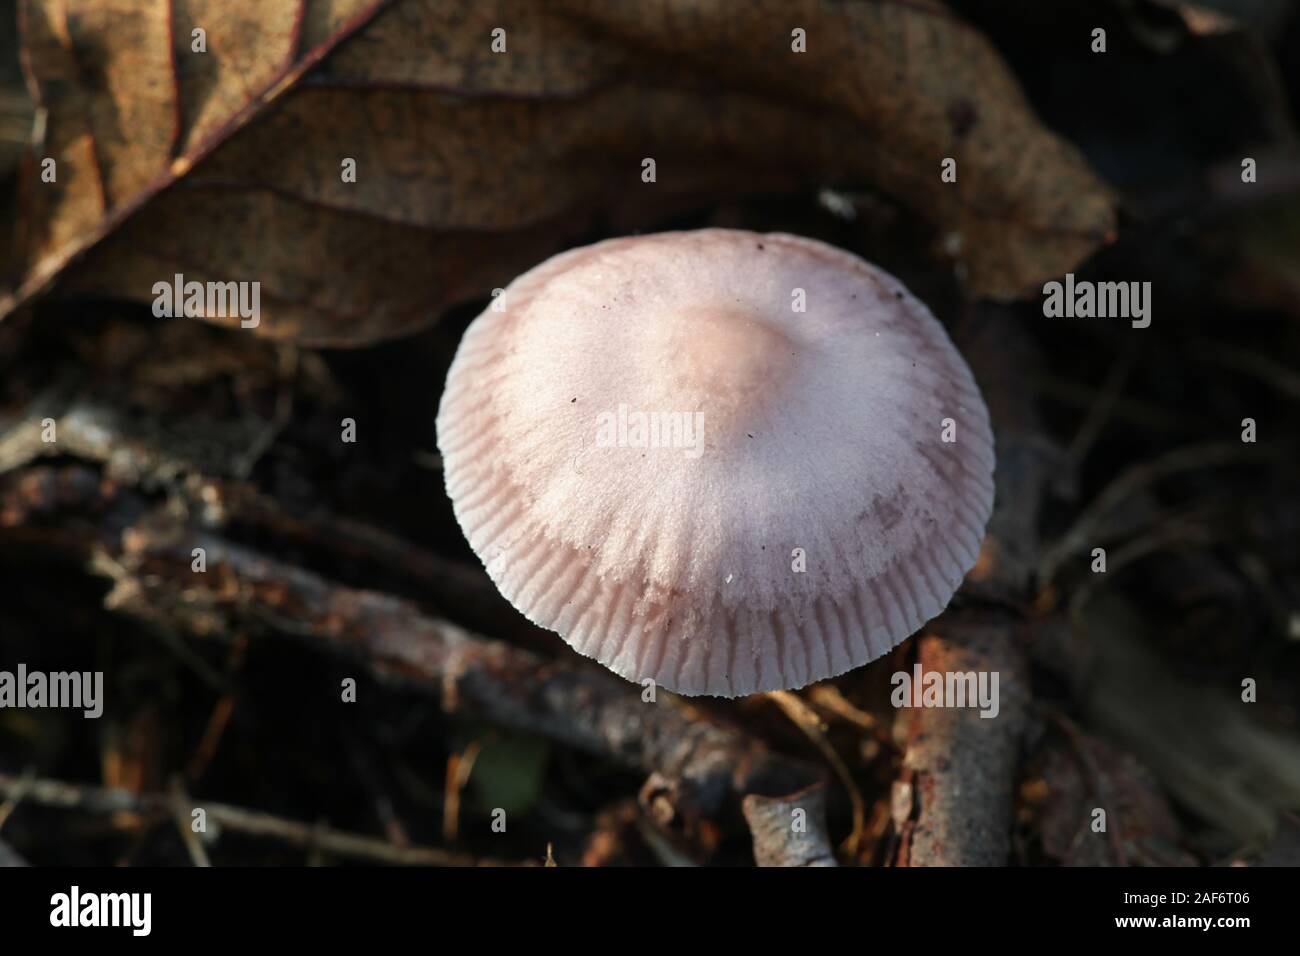 Inocybe lilacina, known as Lilac Fibercap, wild poisonous mushroom from Finland Stock Photo